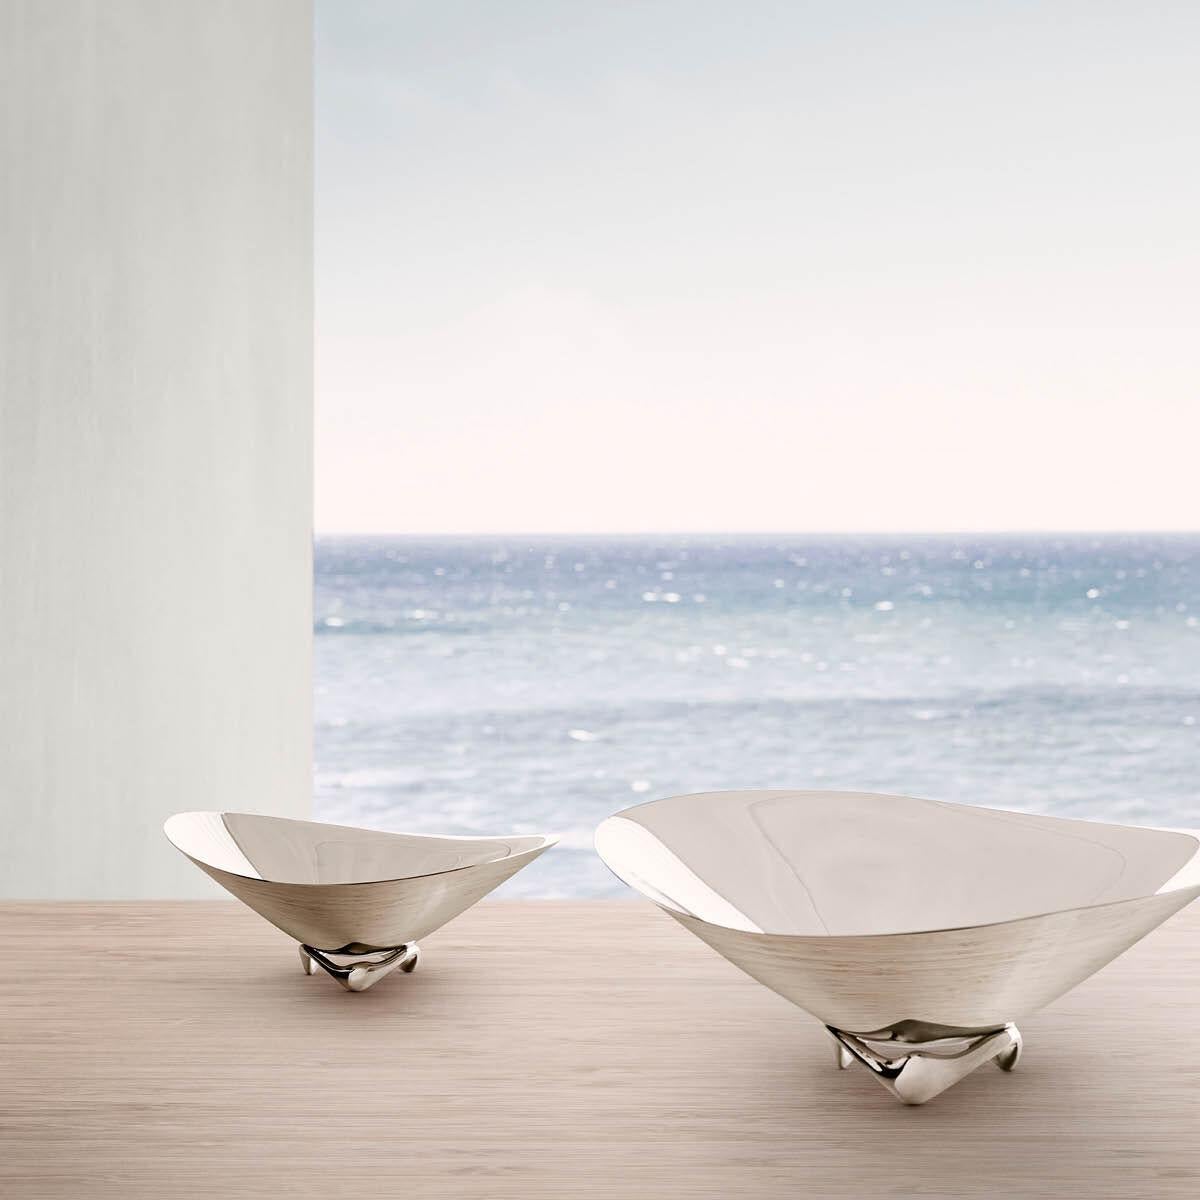 Vividly capturing the movement of the sea, this small decorative bowl makes a striking centrepiece for a table. The fluid, undulating shape seems to almost hover above its stand with the shiny stainless steel surface capturing the light and